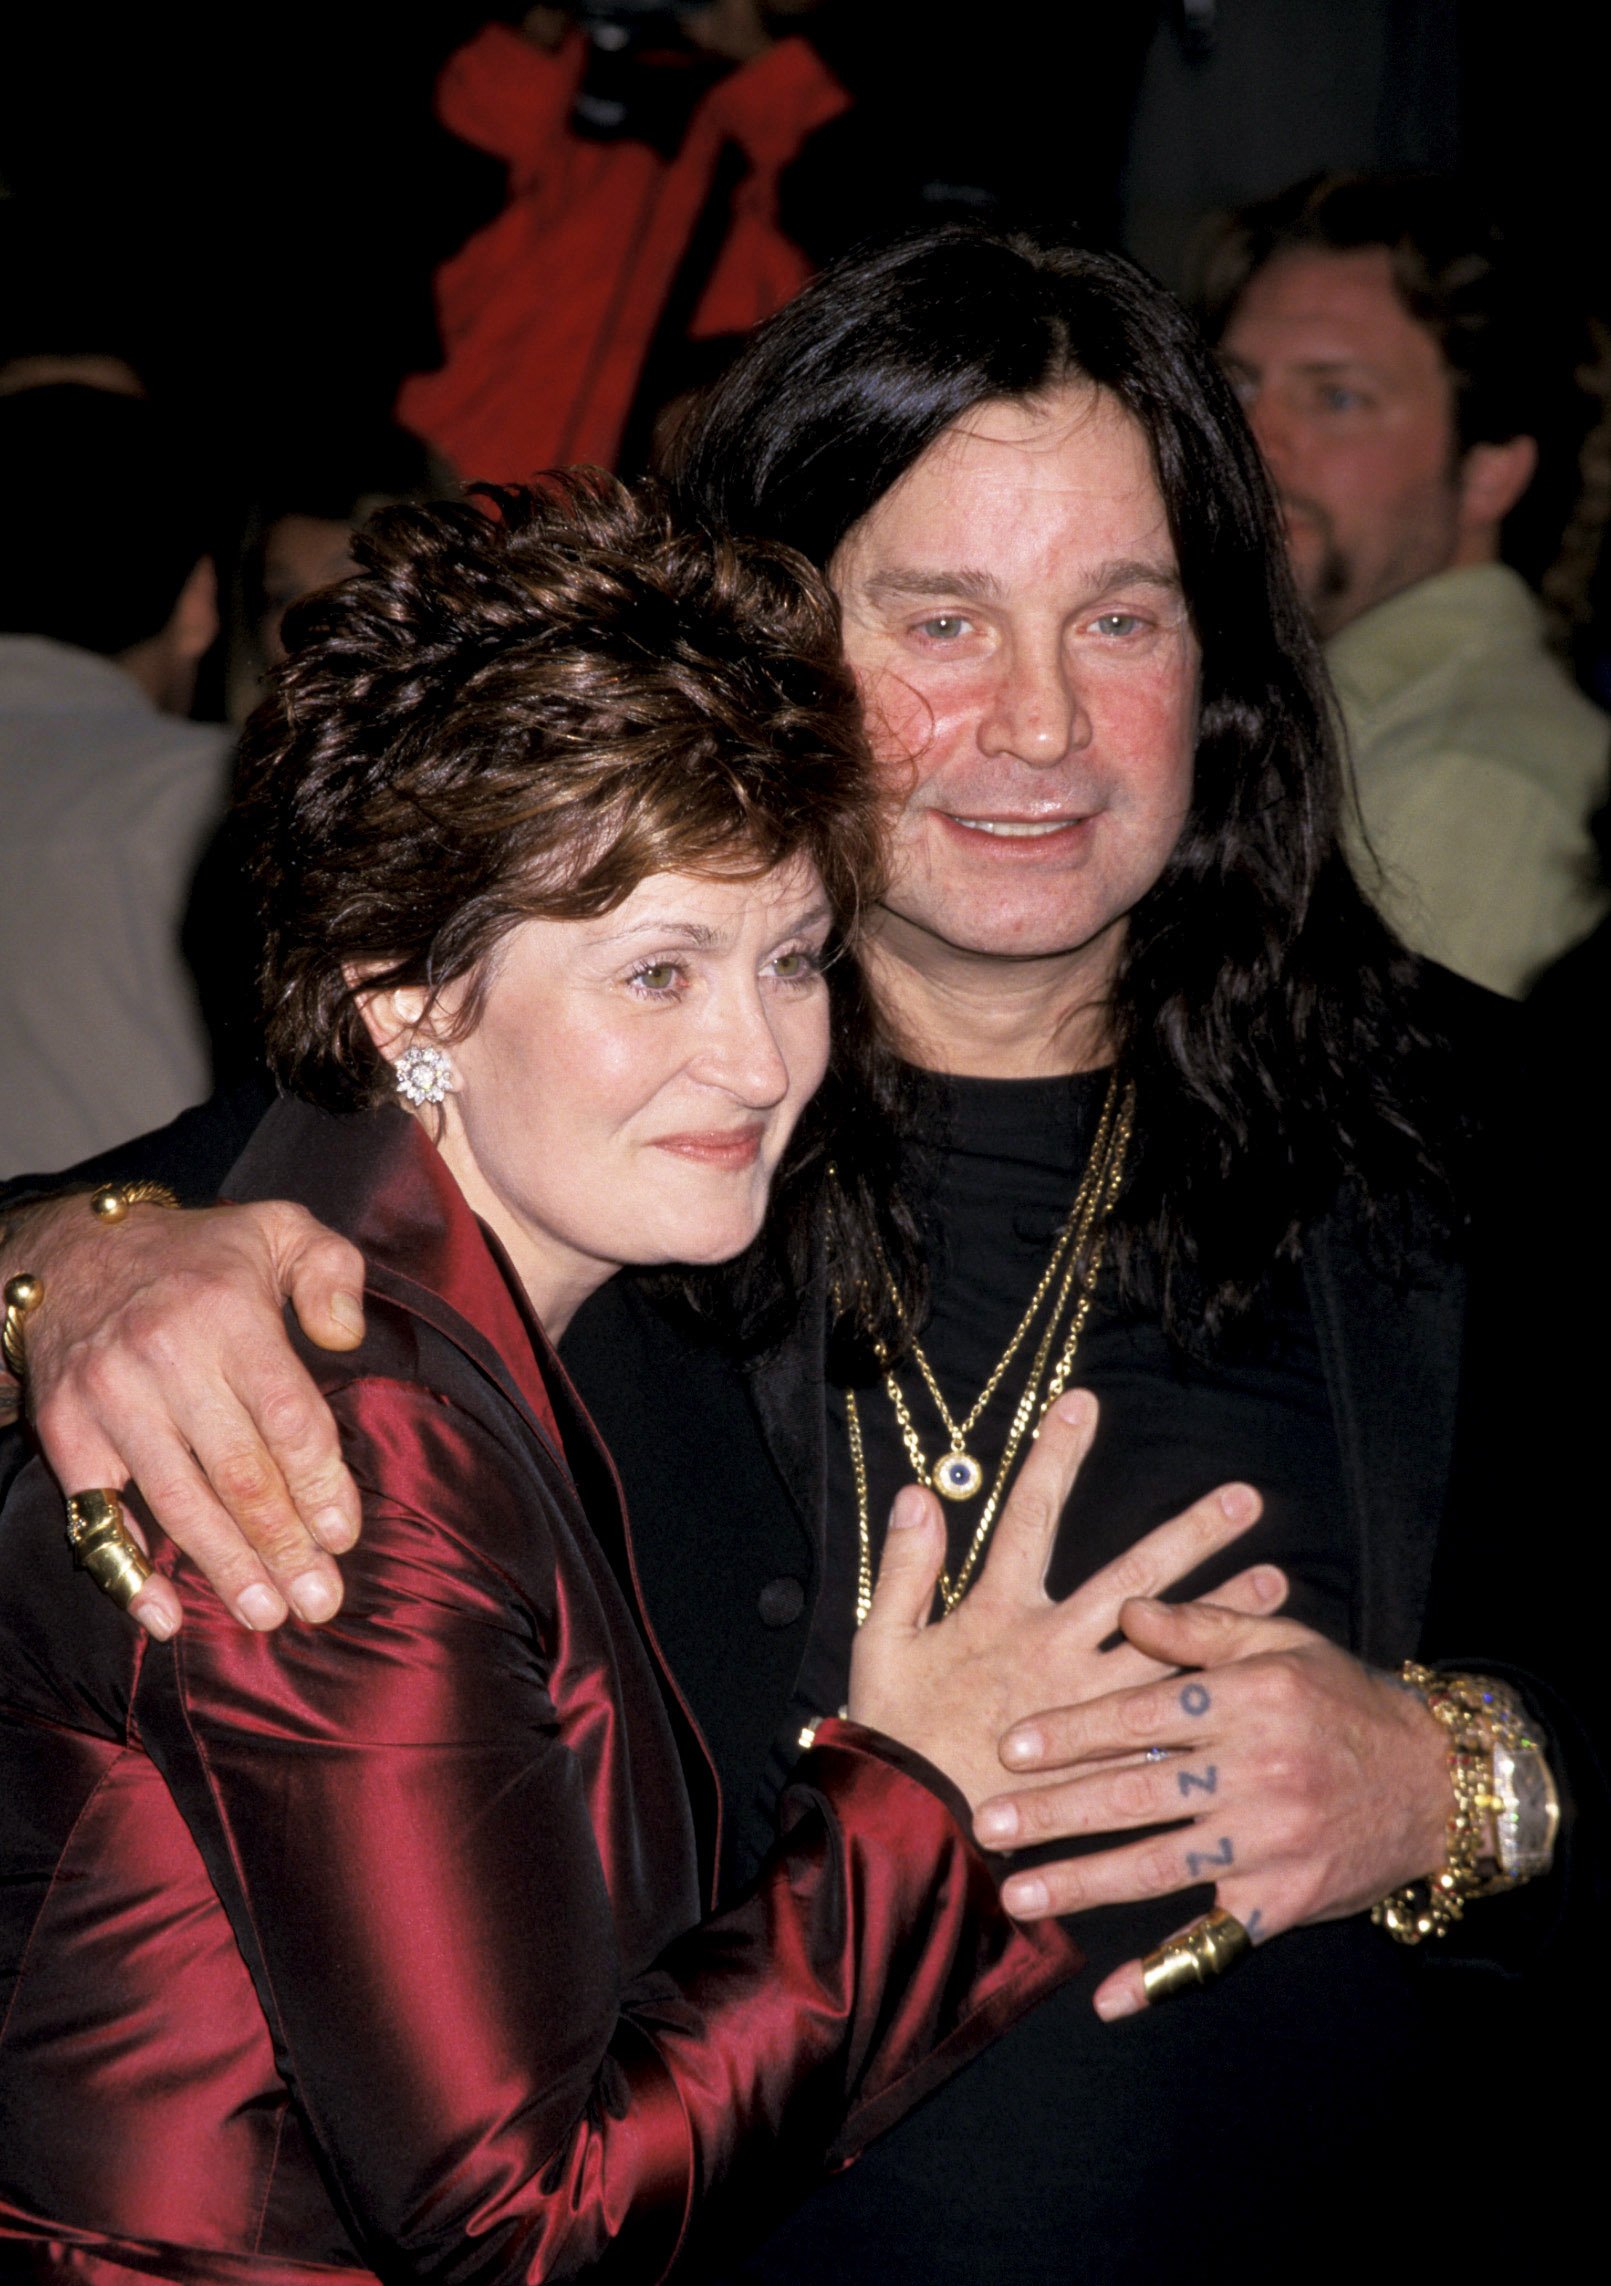 Talk show host Sharon Osbourne and musician Ozzy Osbourne during the Hollywood premiere of "Little Nicky" at Mann Chinese Theatre in Hollywood, California. | Source: Getty Images